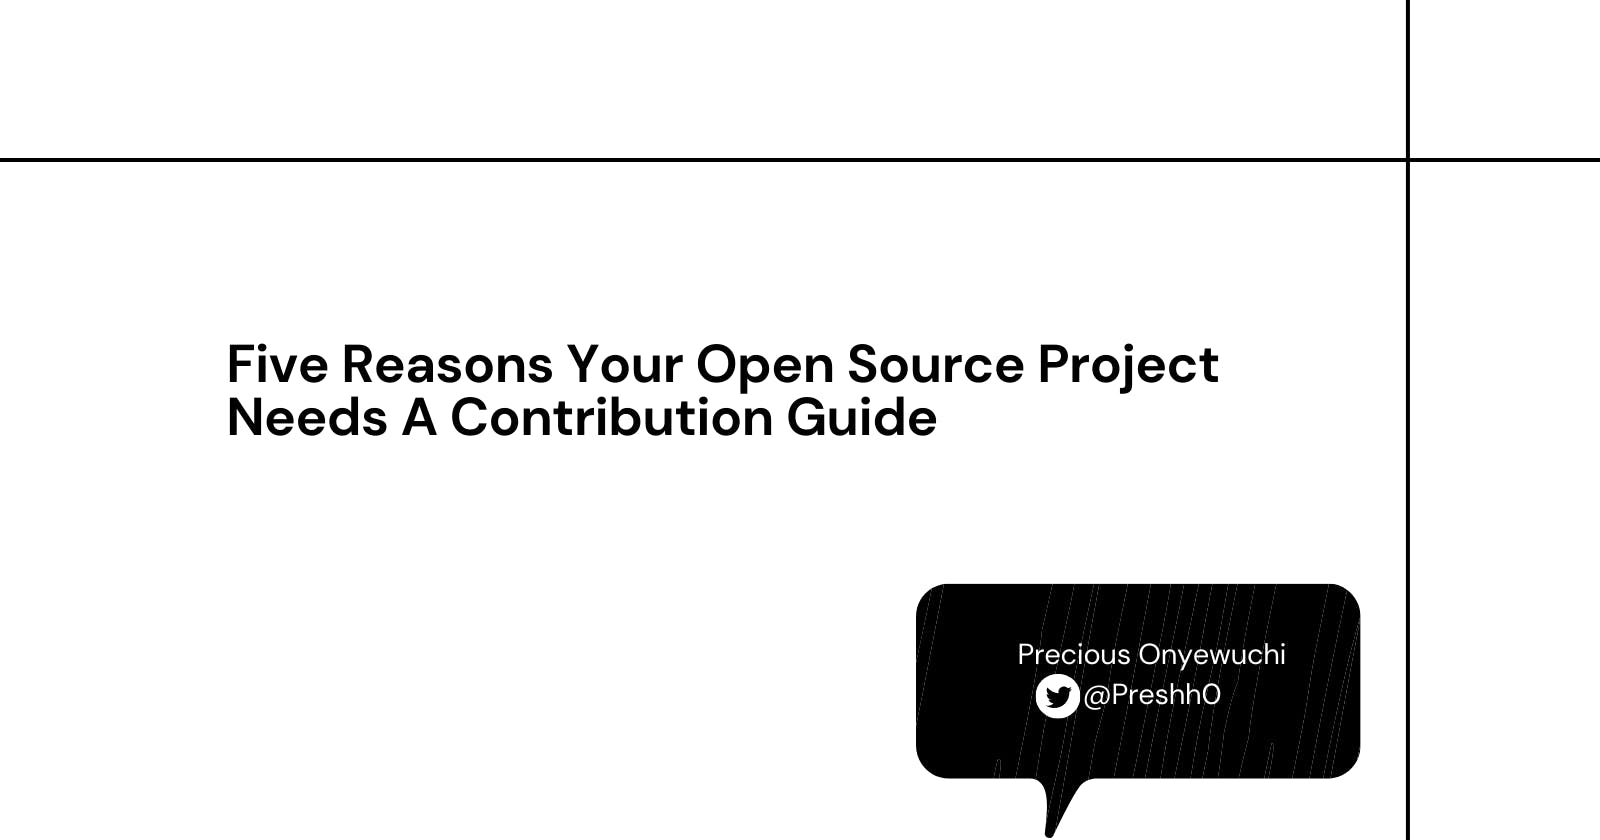 Five Reasons Your Open Source Project Needs A Contribution Guide